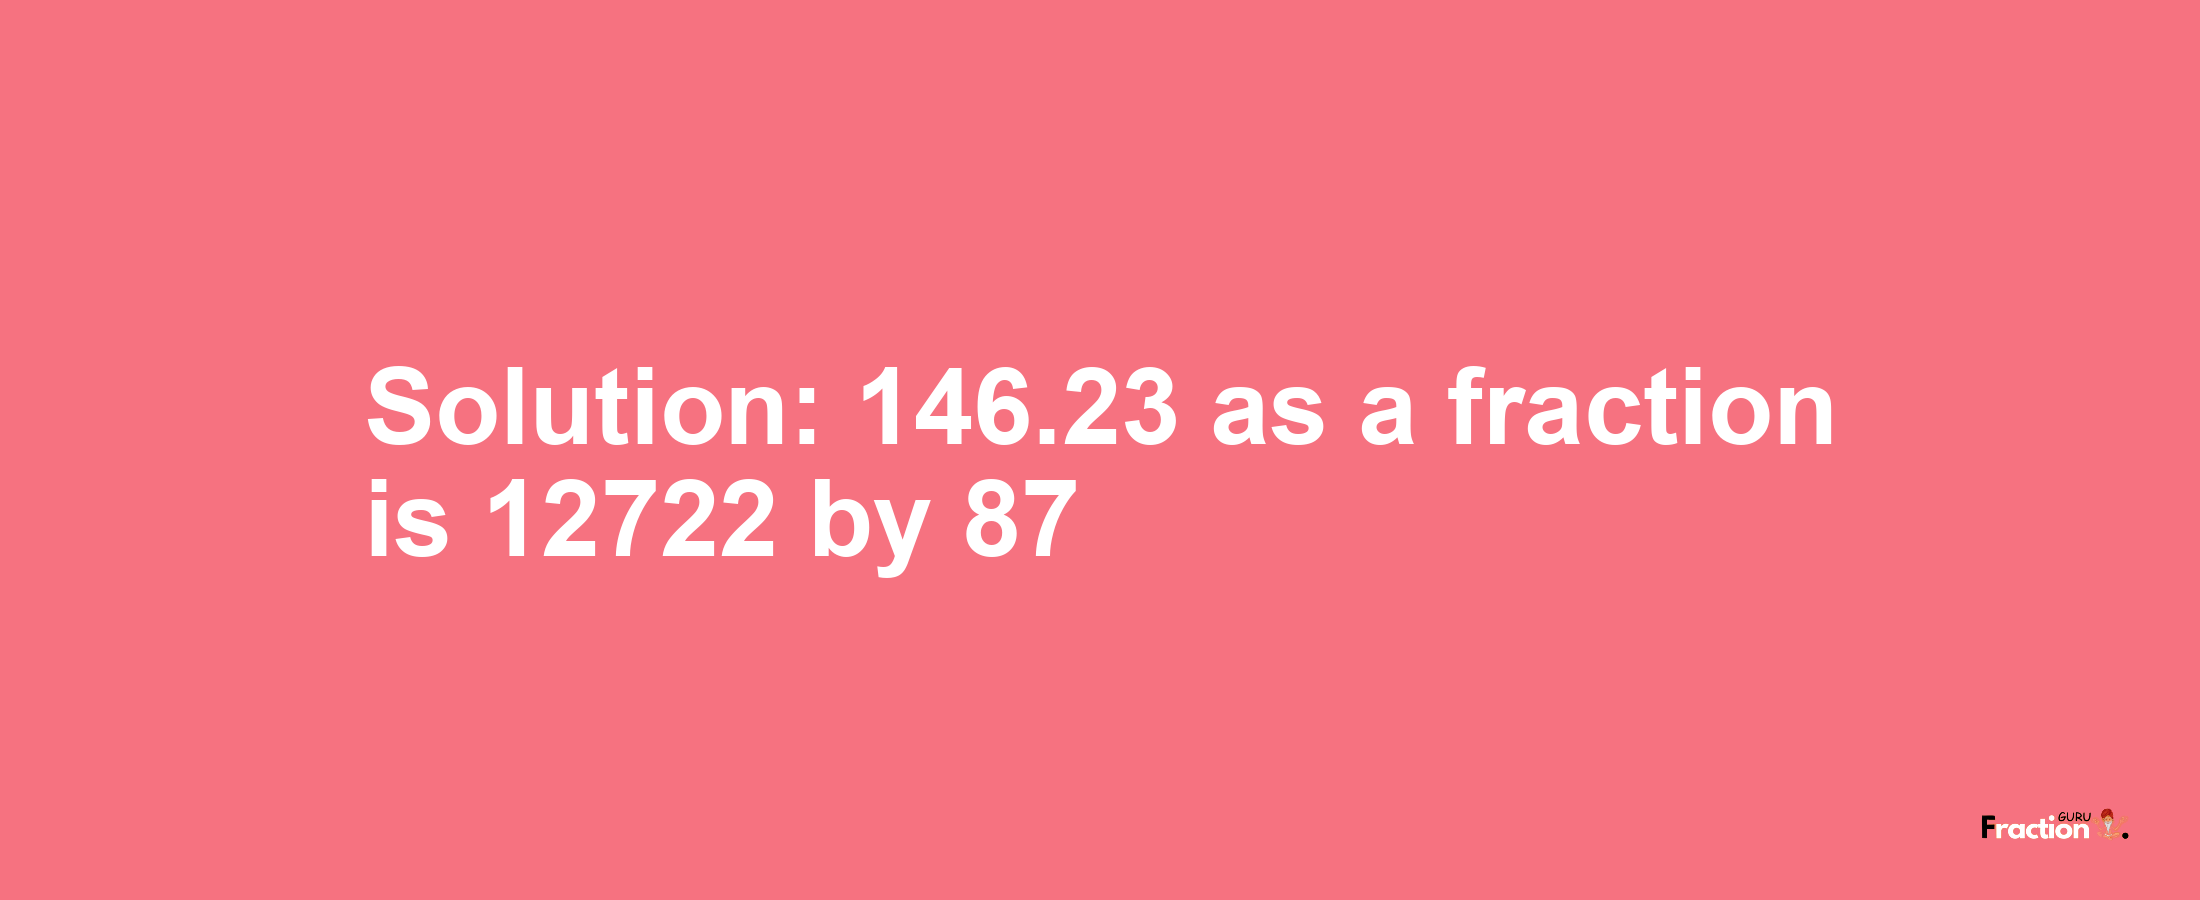 Solution:146.23 as a fraction is 12722/87